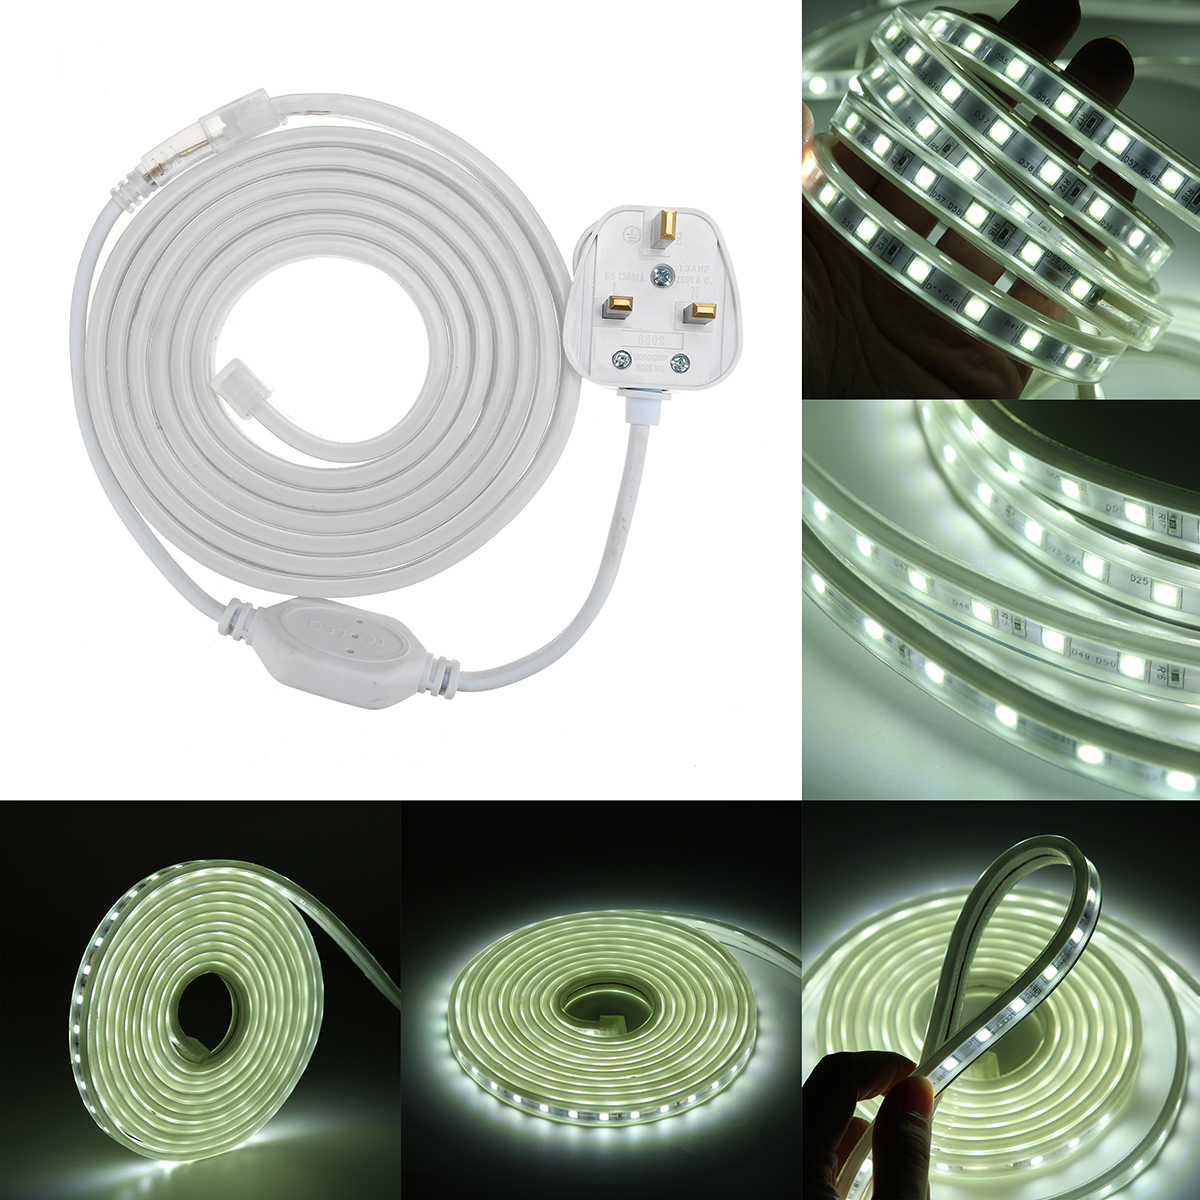 Find 220V LED Strip Lights Lamp Rope 5050 SMD Garden Kitchen Decking IP65 Waterproof Christmas Lights for Sale on Gipsybee.com with cryptocurrencies